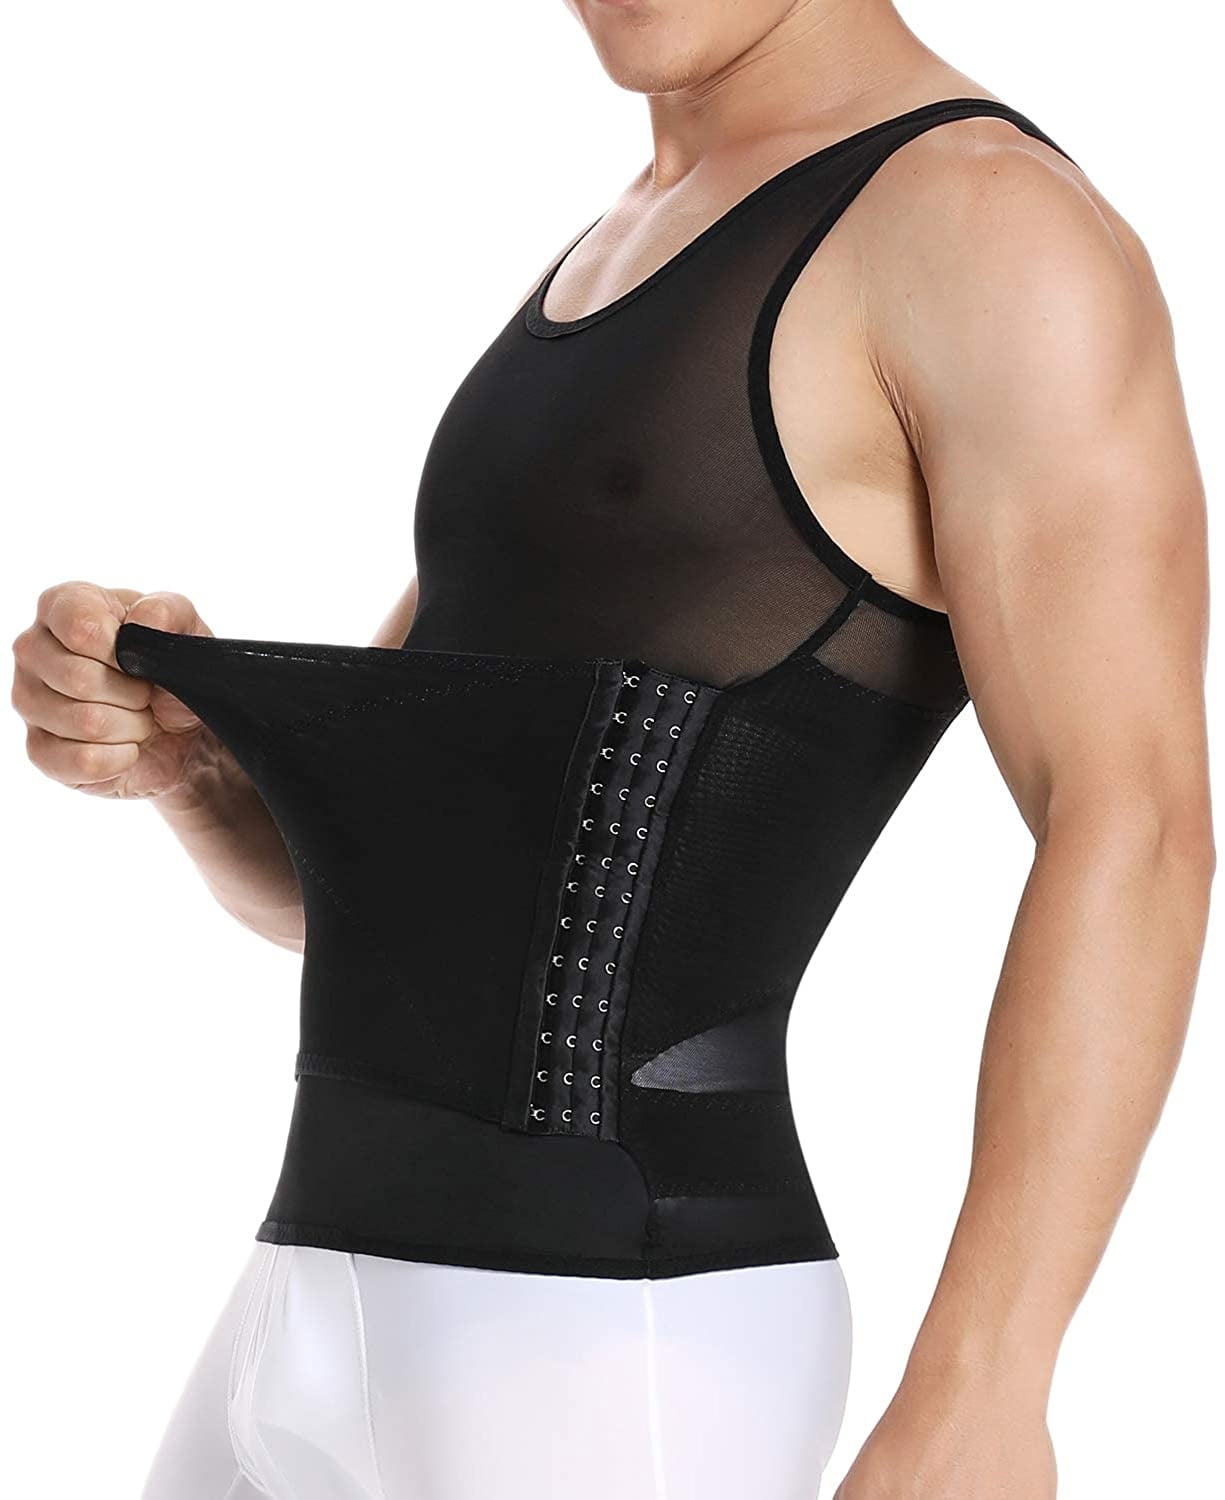 Mens Body Shaping Stomach Flattening Girdle Shirt Underwear for Weight Loss Vest